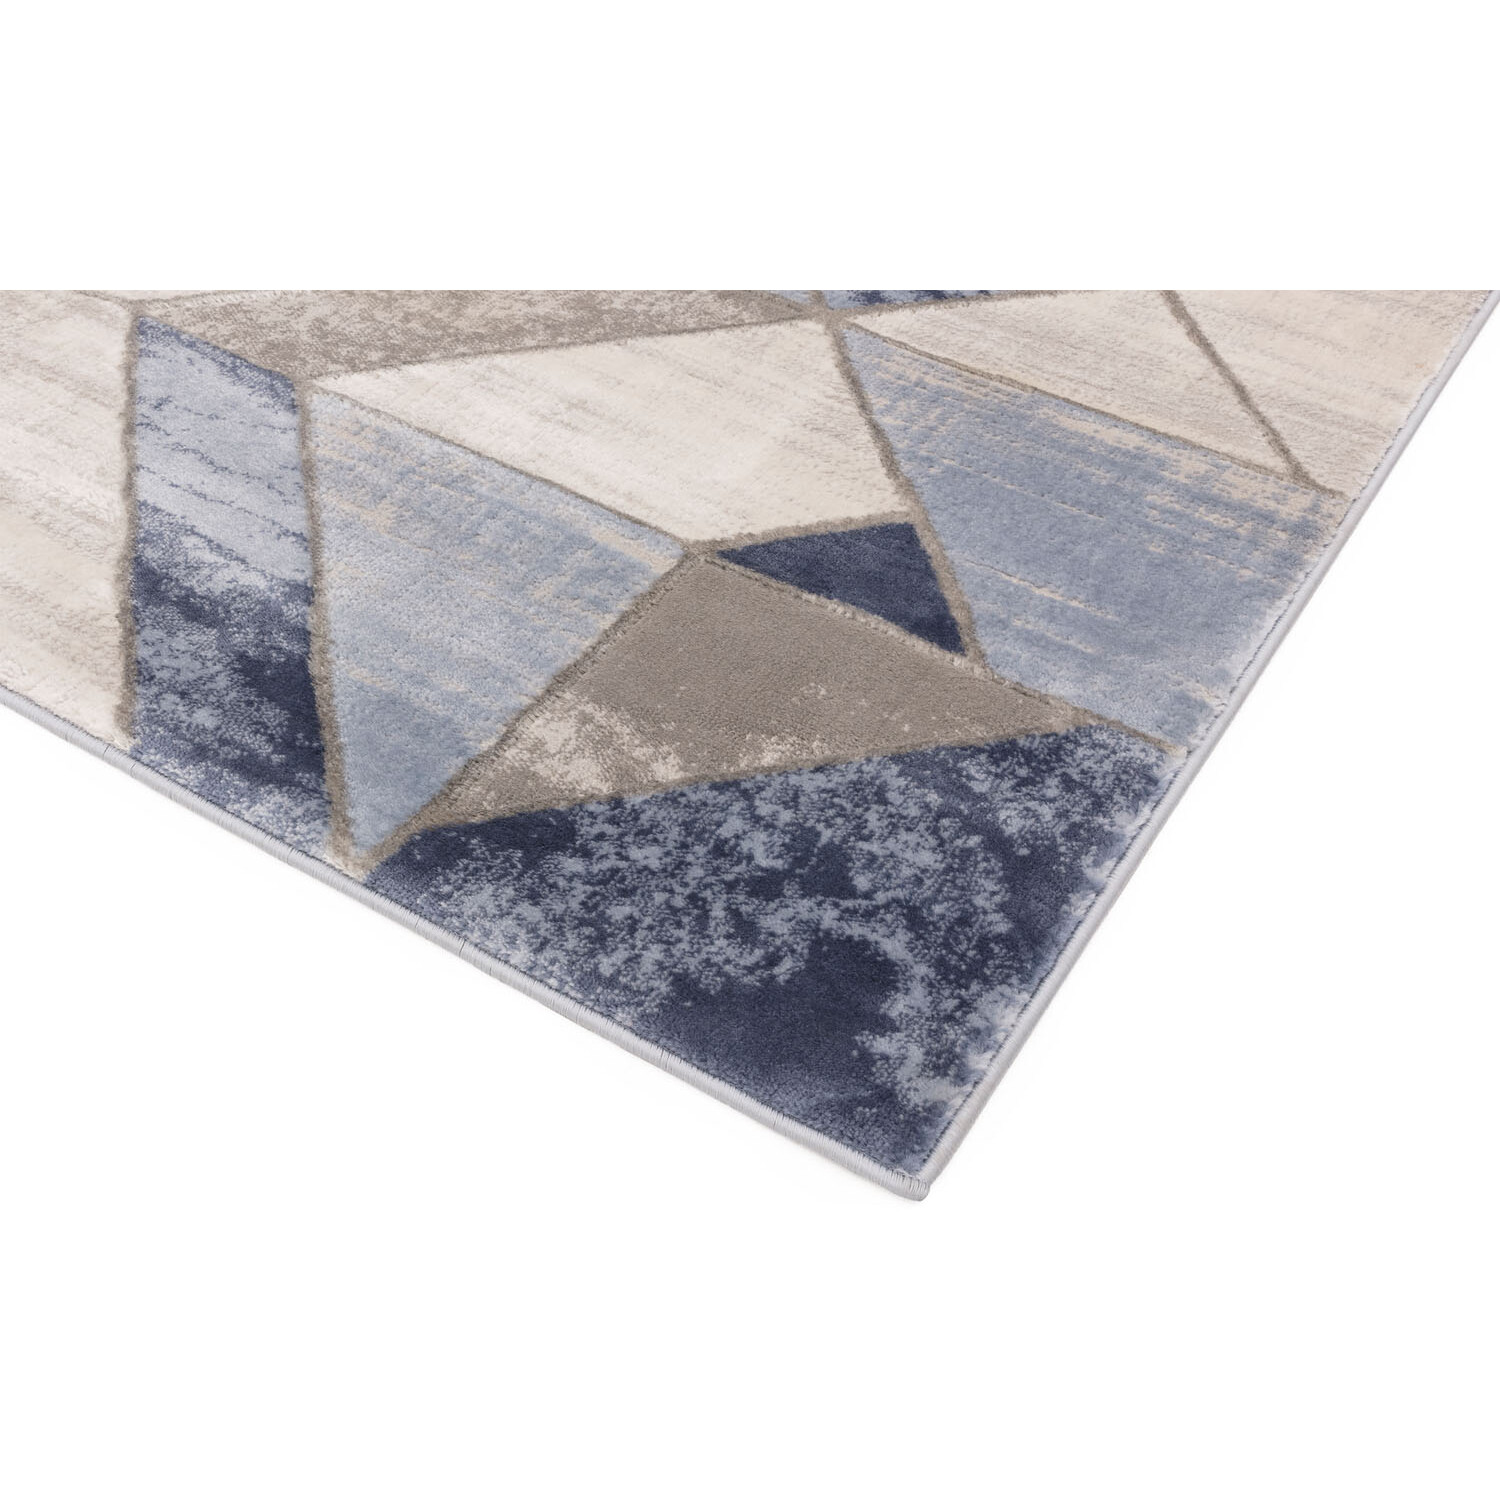 Seattle Blue and Grey Geo Rug 170 x 120cm Image 2